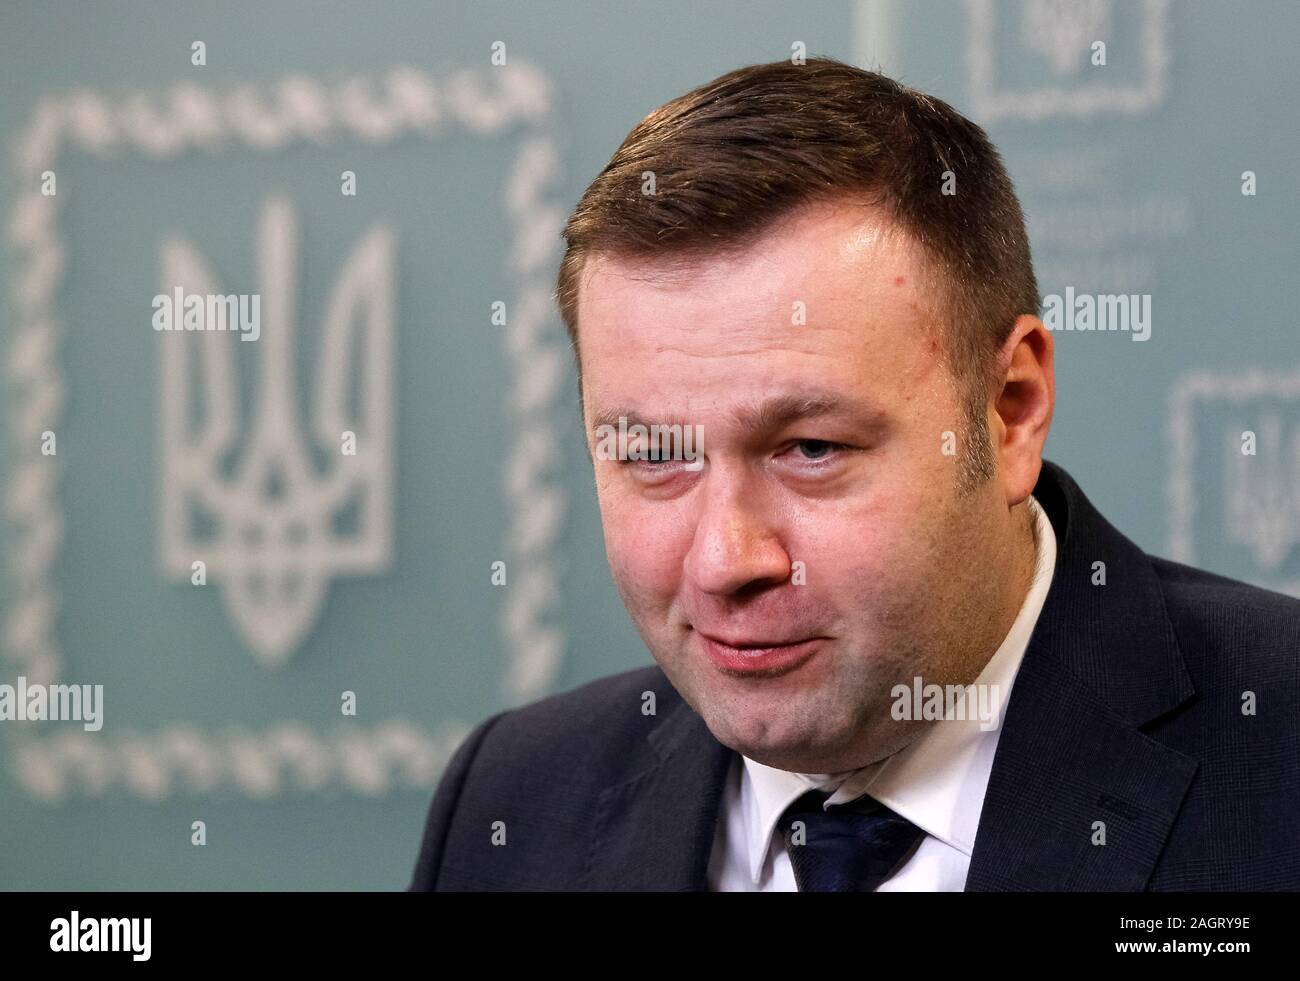 Ukrainian Minister of energy and environmental protection, Oleksiy Orzhel attends a press conference in Kiev.The European Union, Russia and Ukraine reached a final agreement about gas transit of Russian gas via Ukraine to Europe during the gas talks, reportedly by media. Stock Photo